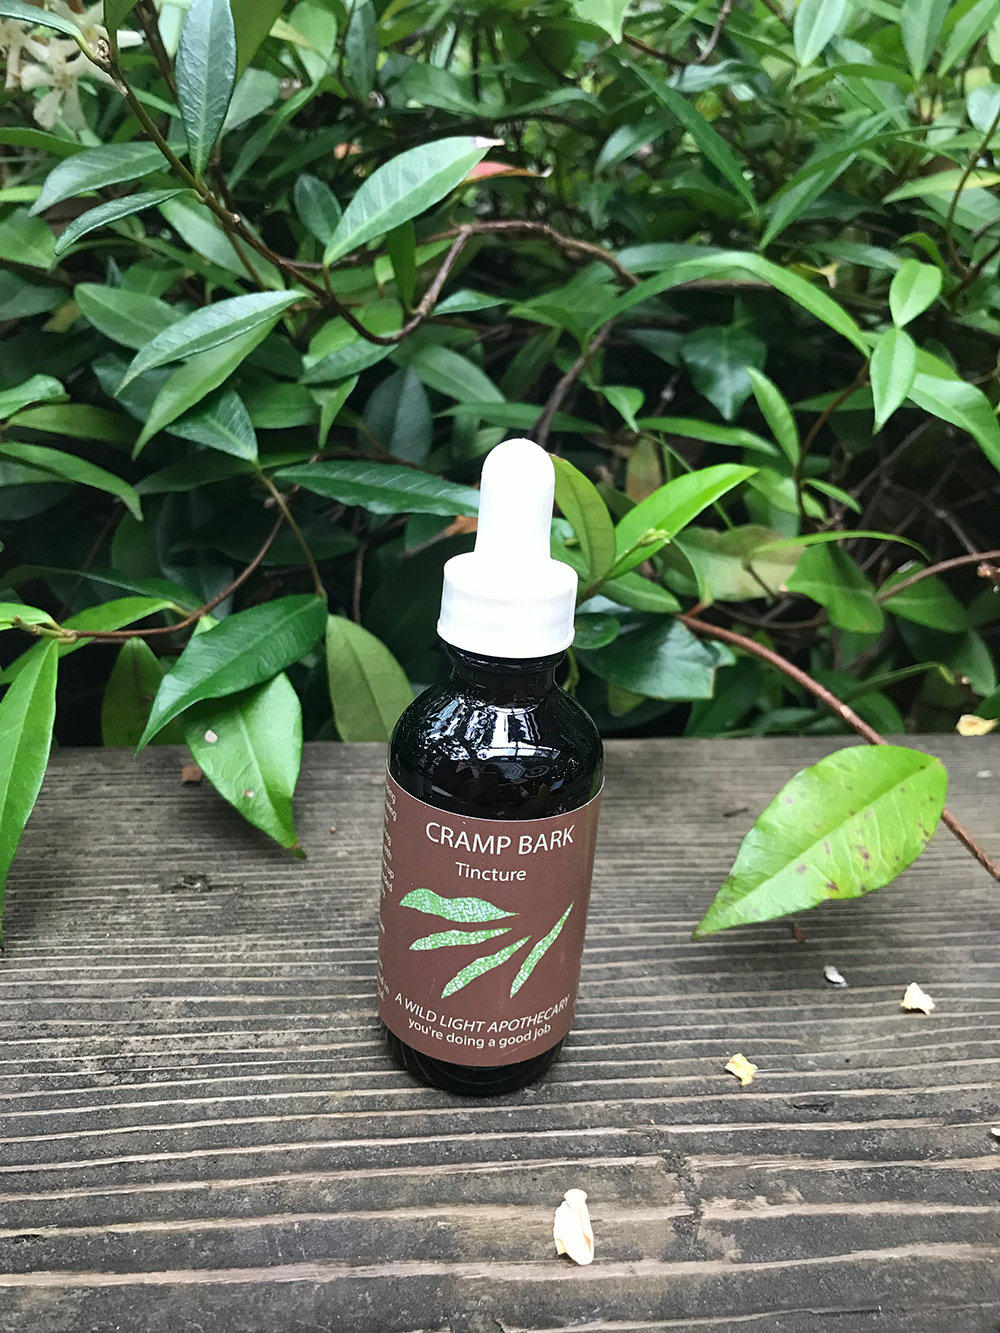 Cramp Bark Tincture 2 oz by A wild Light Apothecary